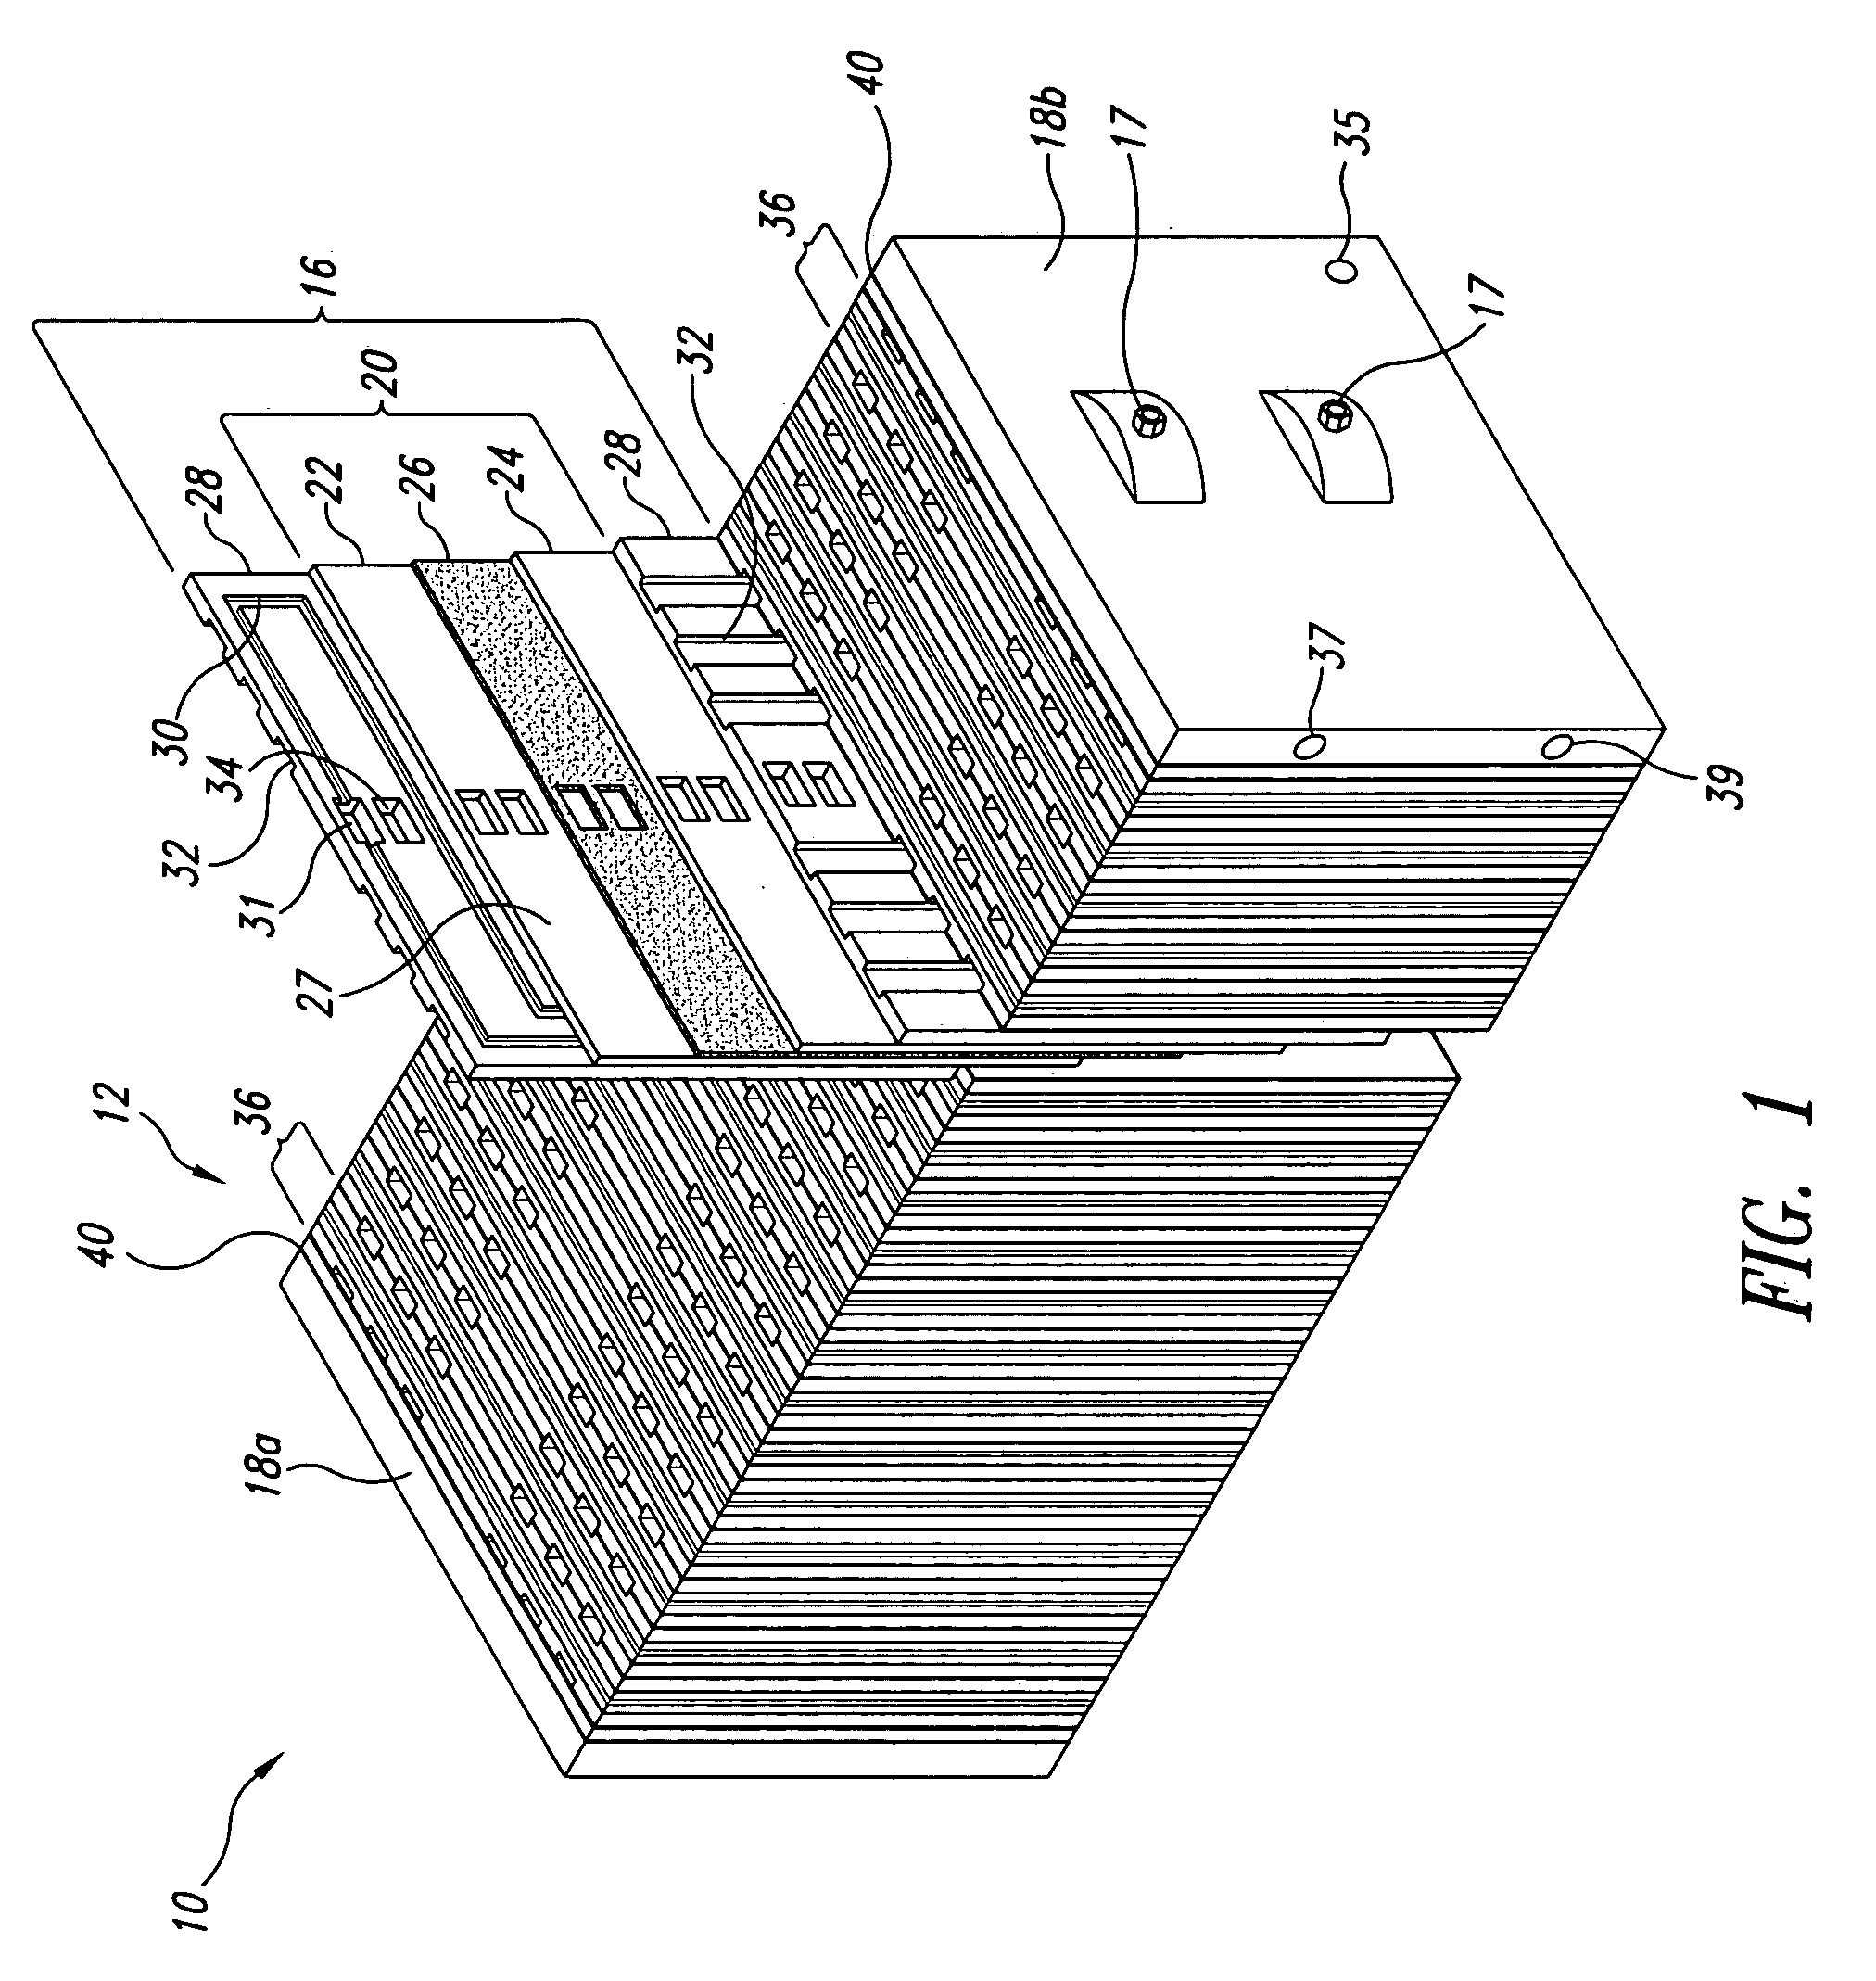 Integrated current collector and electrical component plate for a fuel cell stack